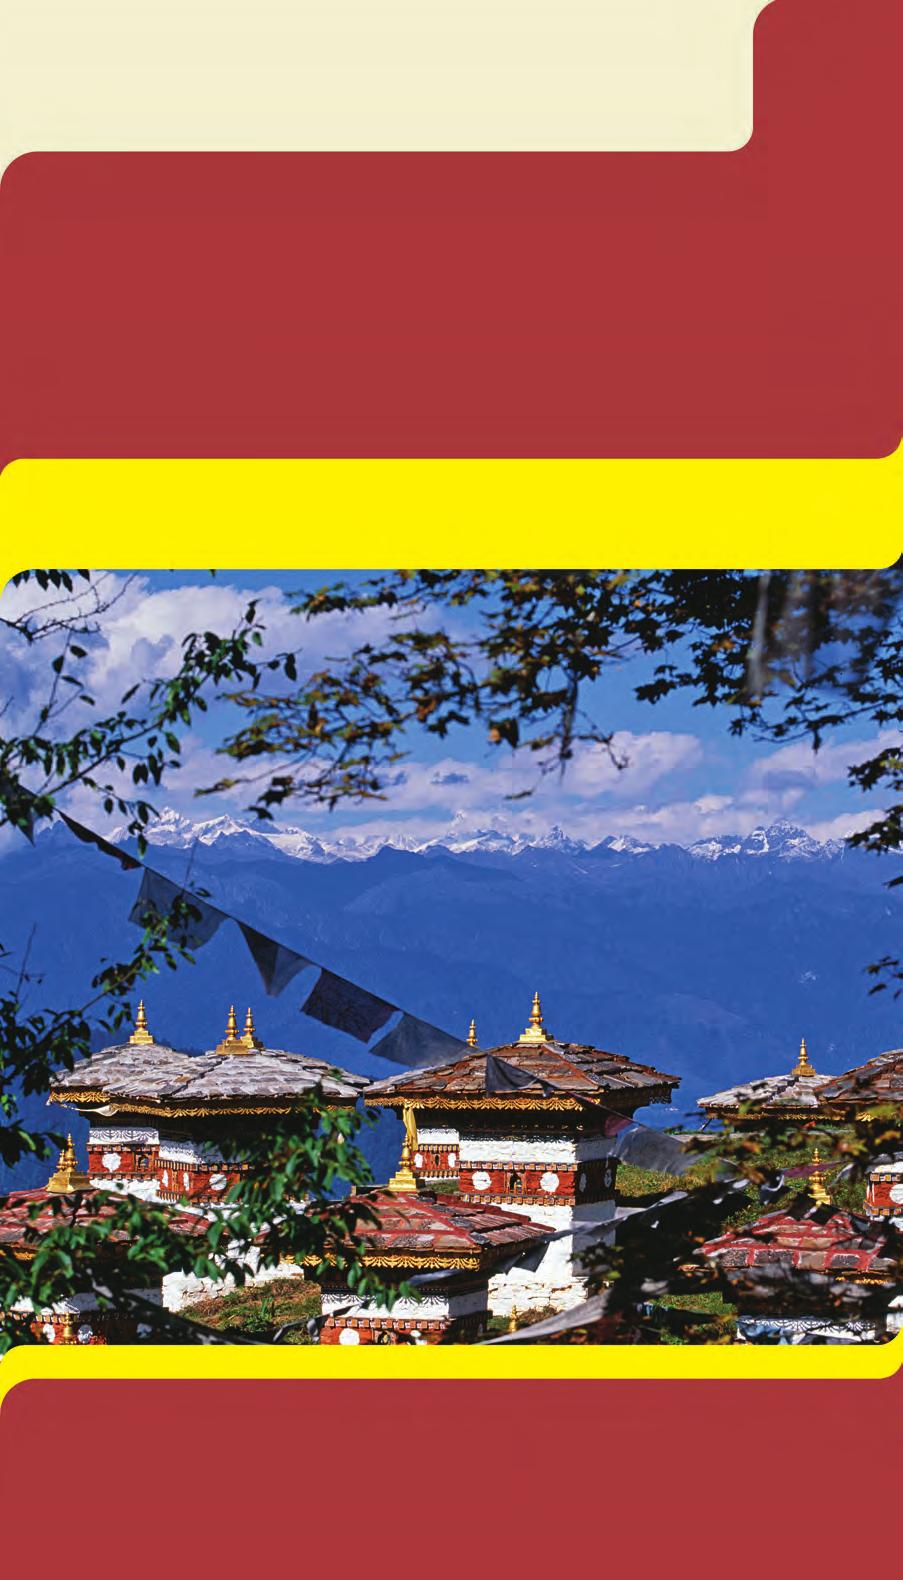 HIMALAYAN KINGDOMS: NEPAL & BHUTAN September 13-27, 2016 15 days from $5,097 total price from Boston, New